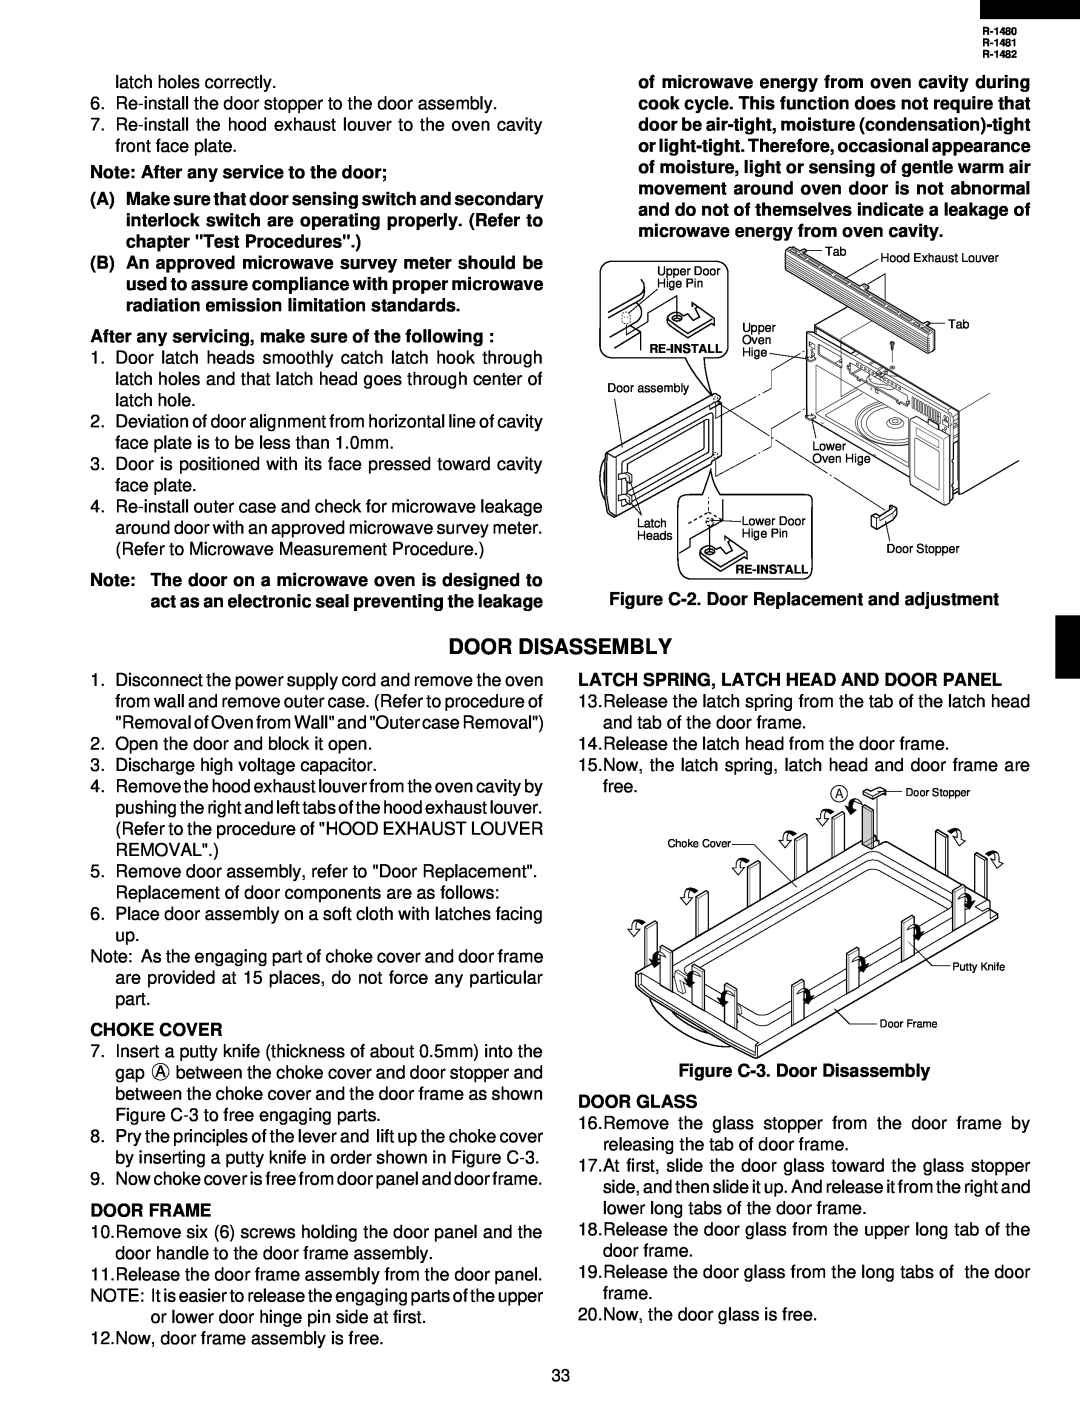 Sharp R-1481, R-1480 Door Disassembly, Note After any service to the door, After any servicing, make sure of the following 